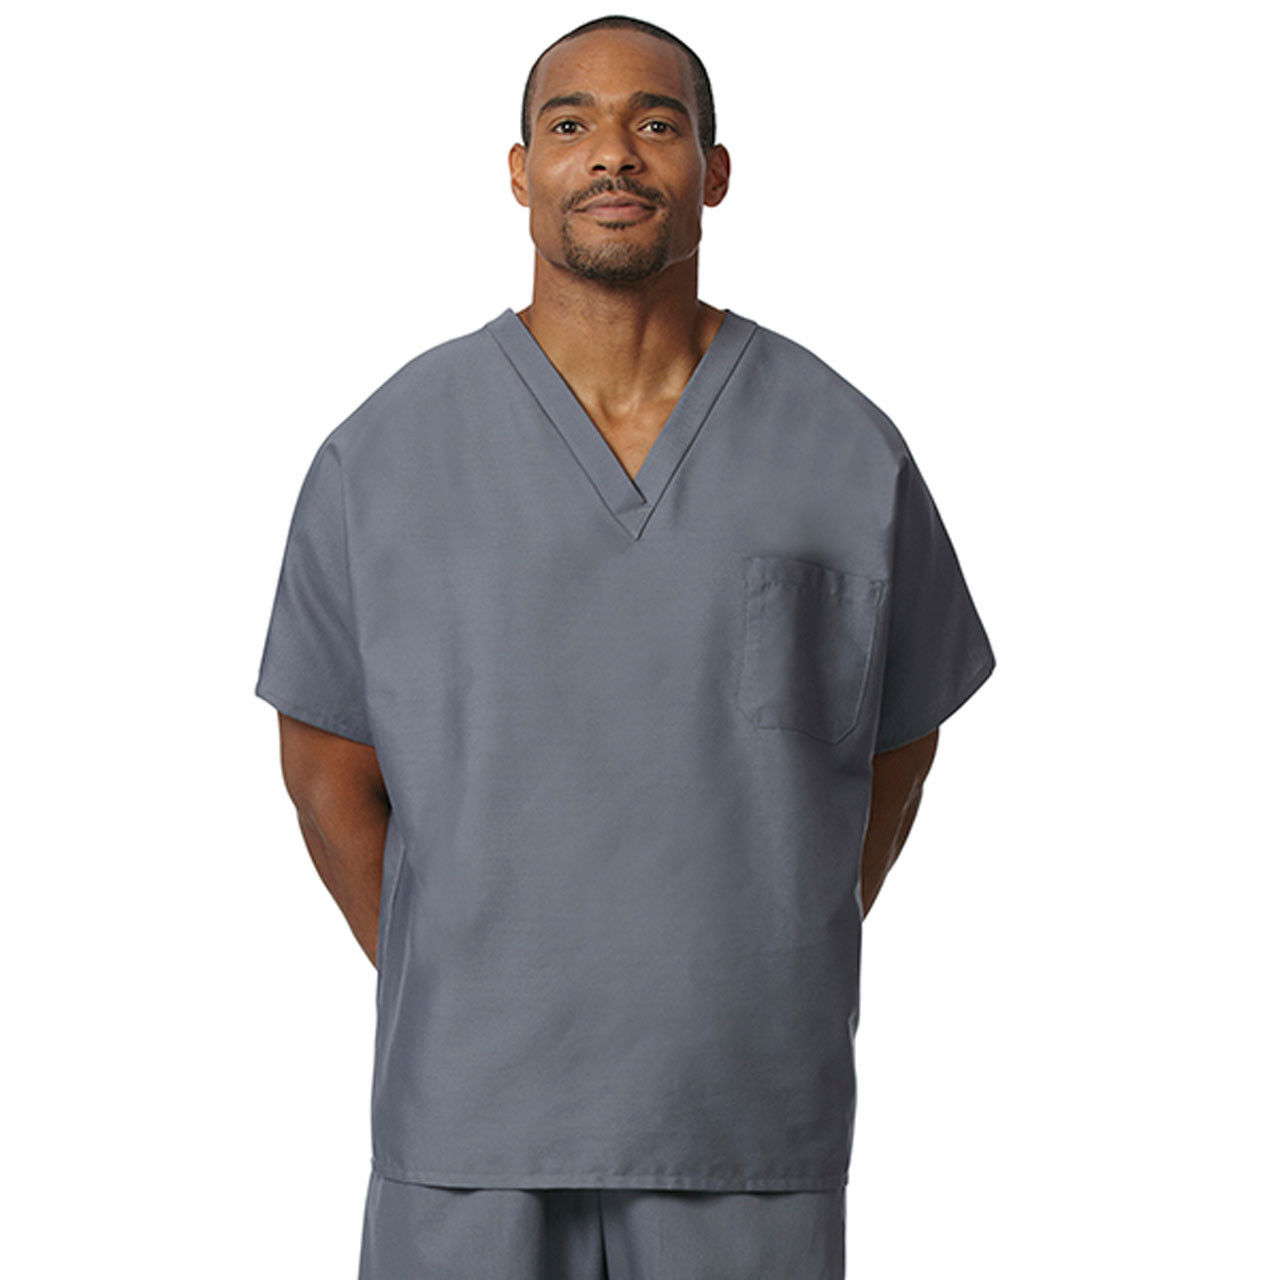 Can the Gray Scrub Tops be bought in bulk?